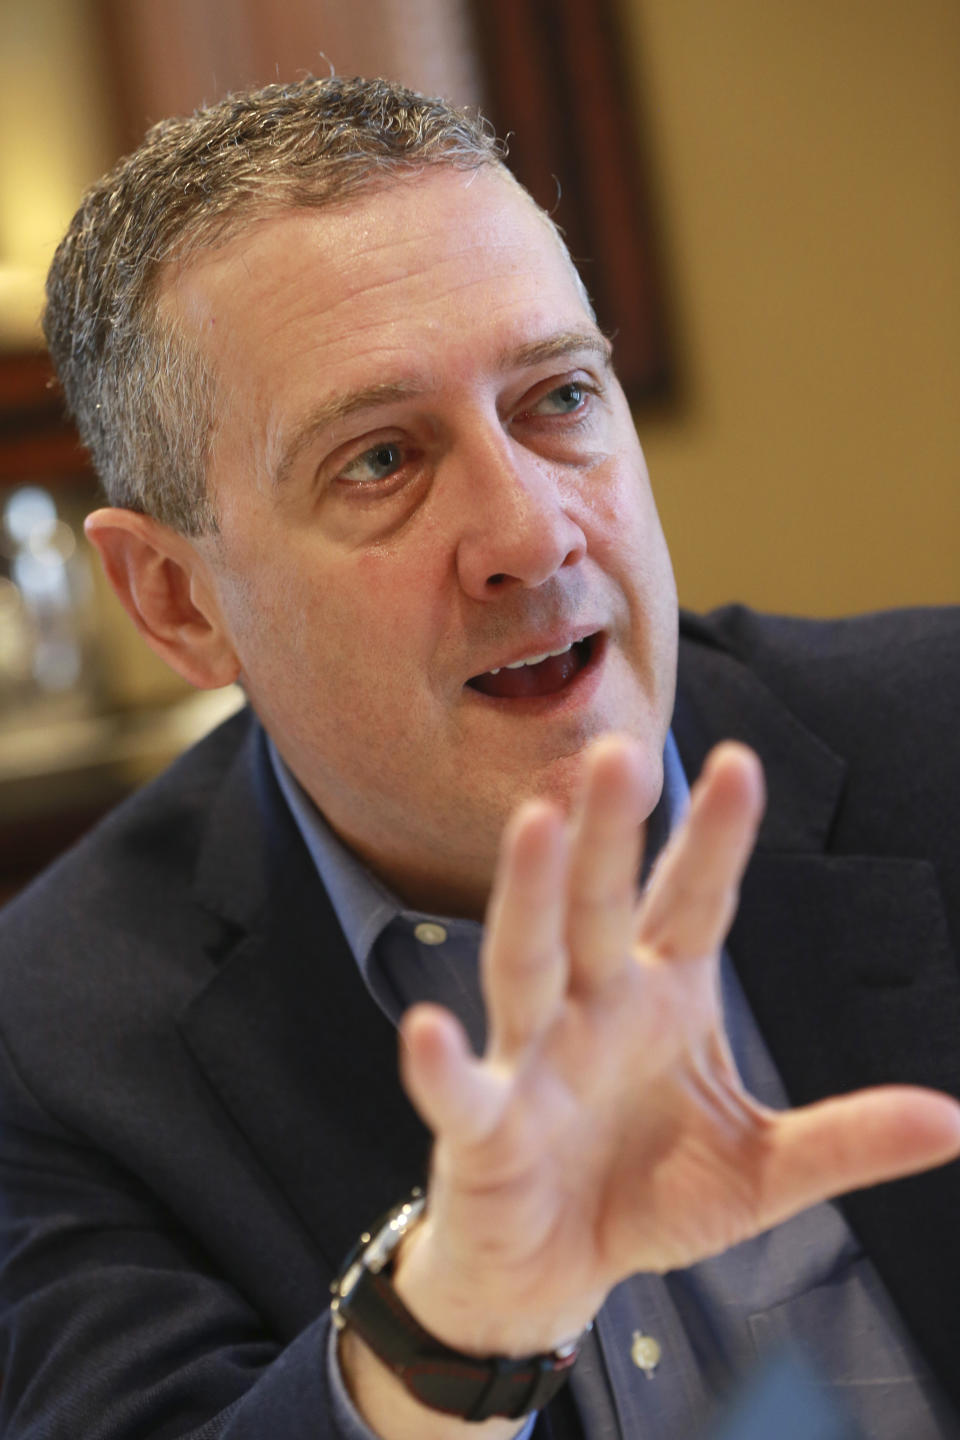 In this Nov. 19, 2019, photo James Bullard, president of the St. Louis Federal Reserve Bank, gestures during an interview in Richmond, Va. (AP Photo/Steve Helber)